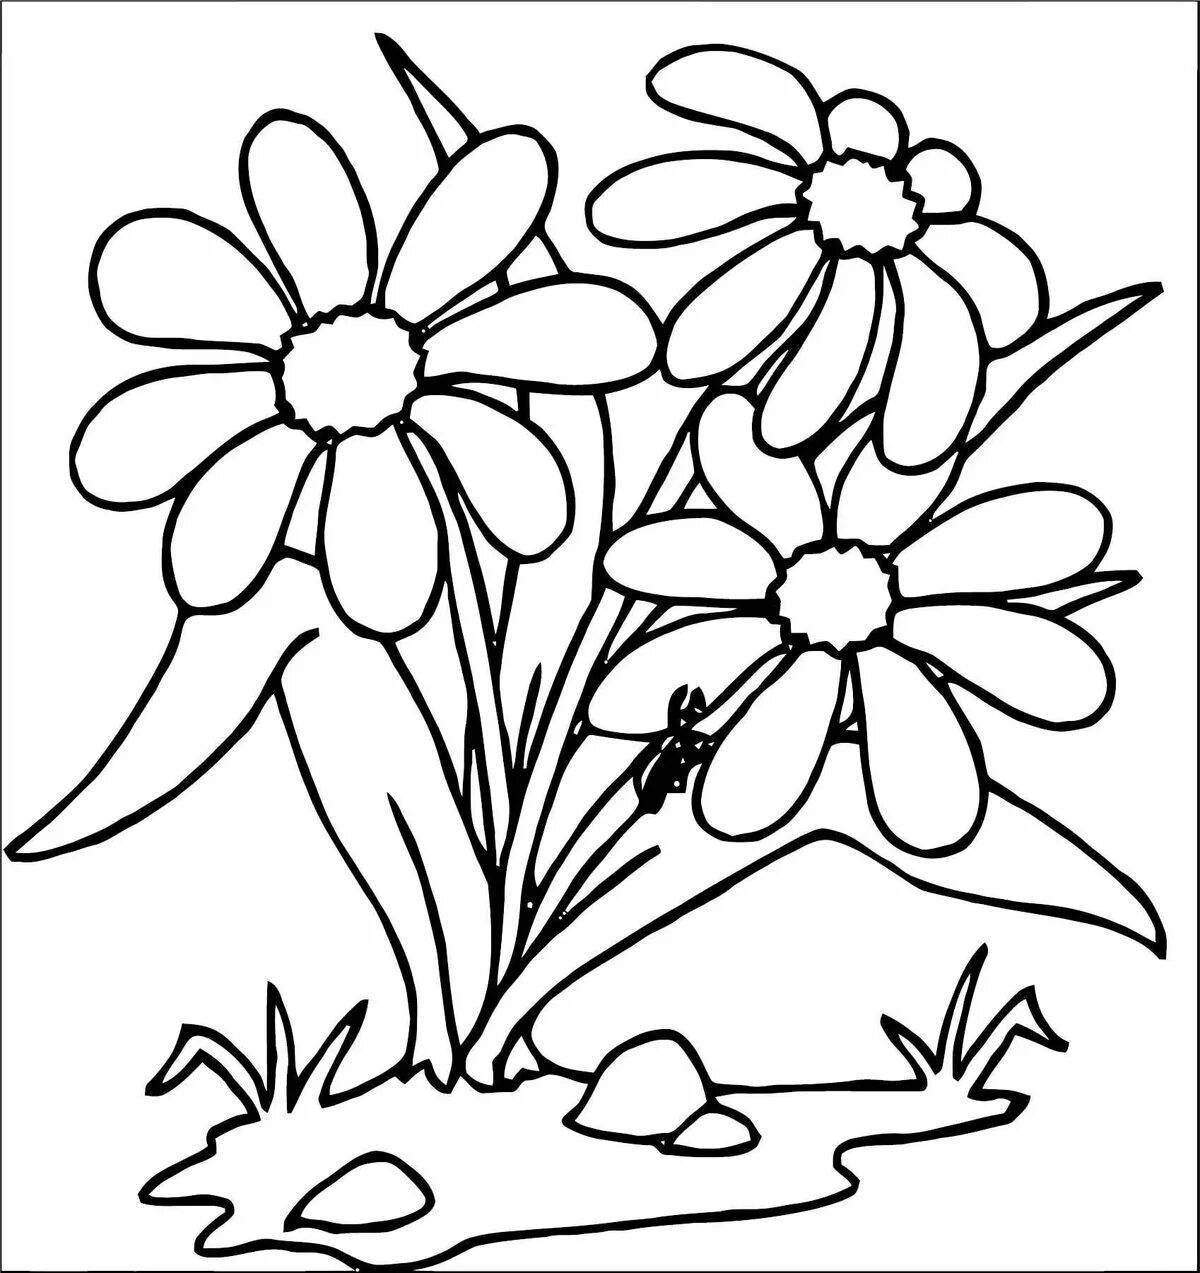 Flowerbed live coloring